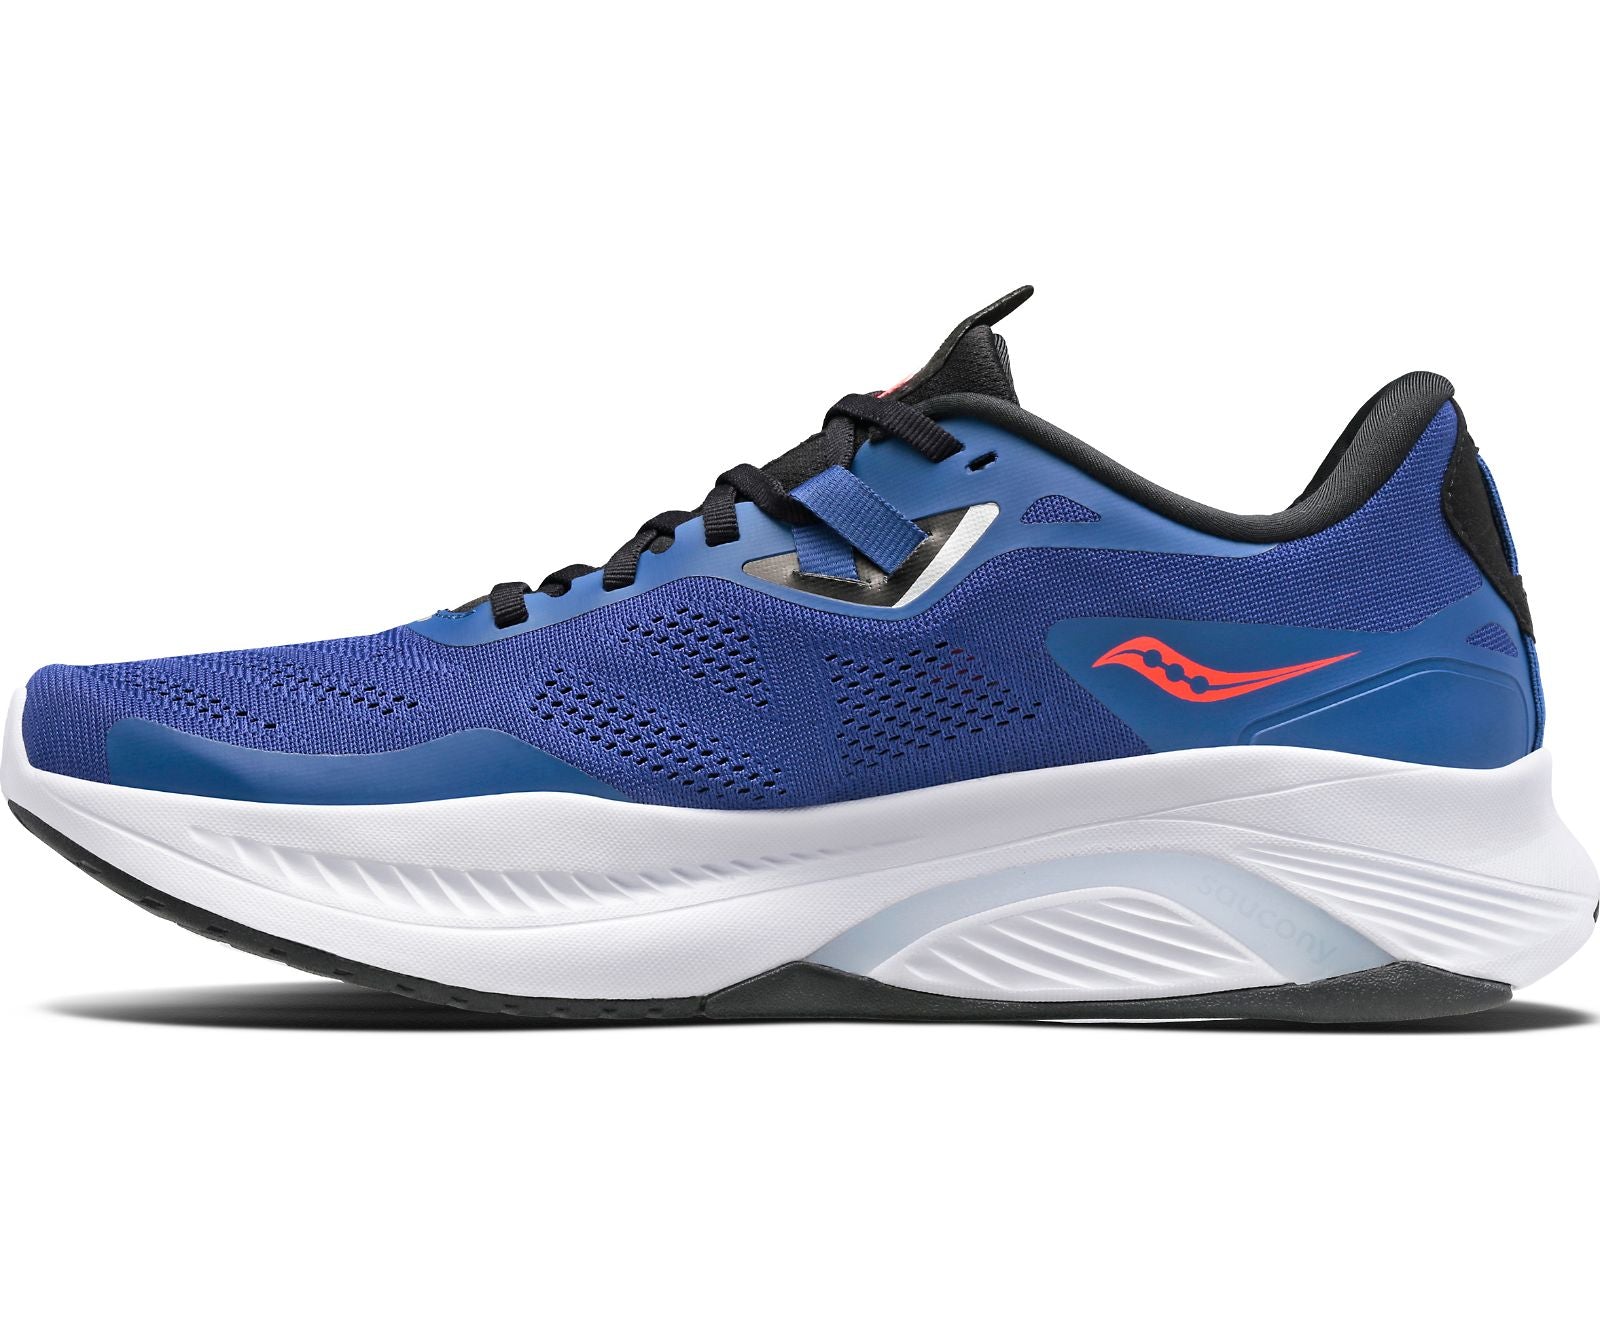 Medial view of the Men's Guide 15 by Saucony in the wide "2E" width, color Sapphire/Black